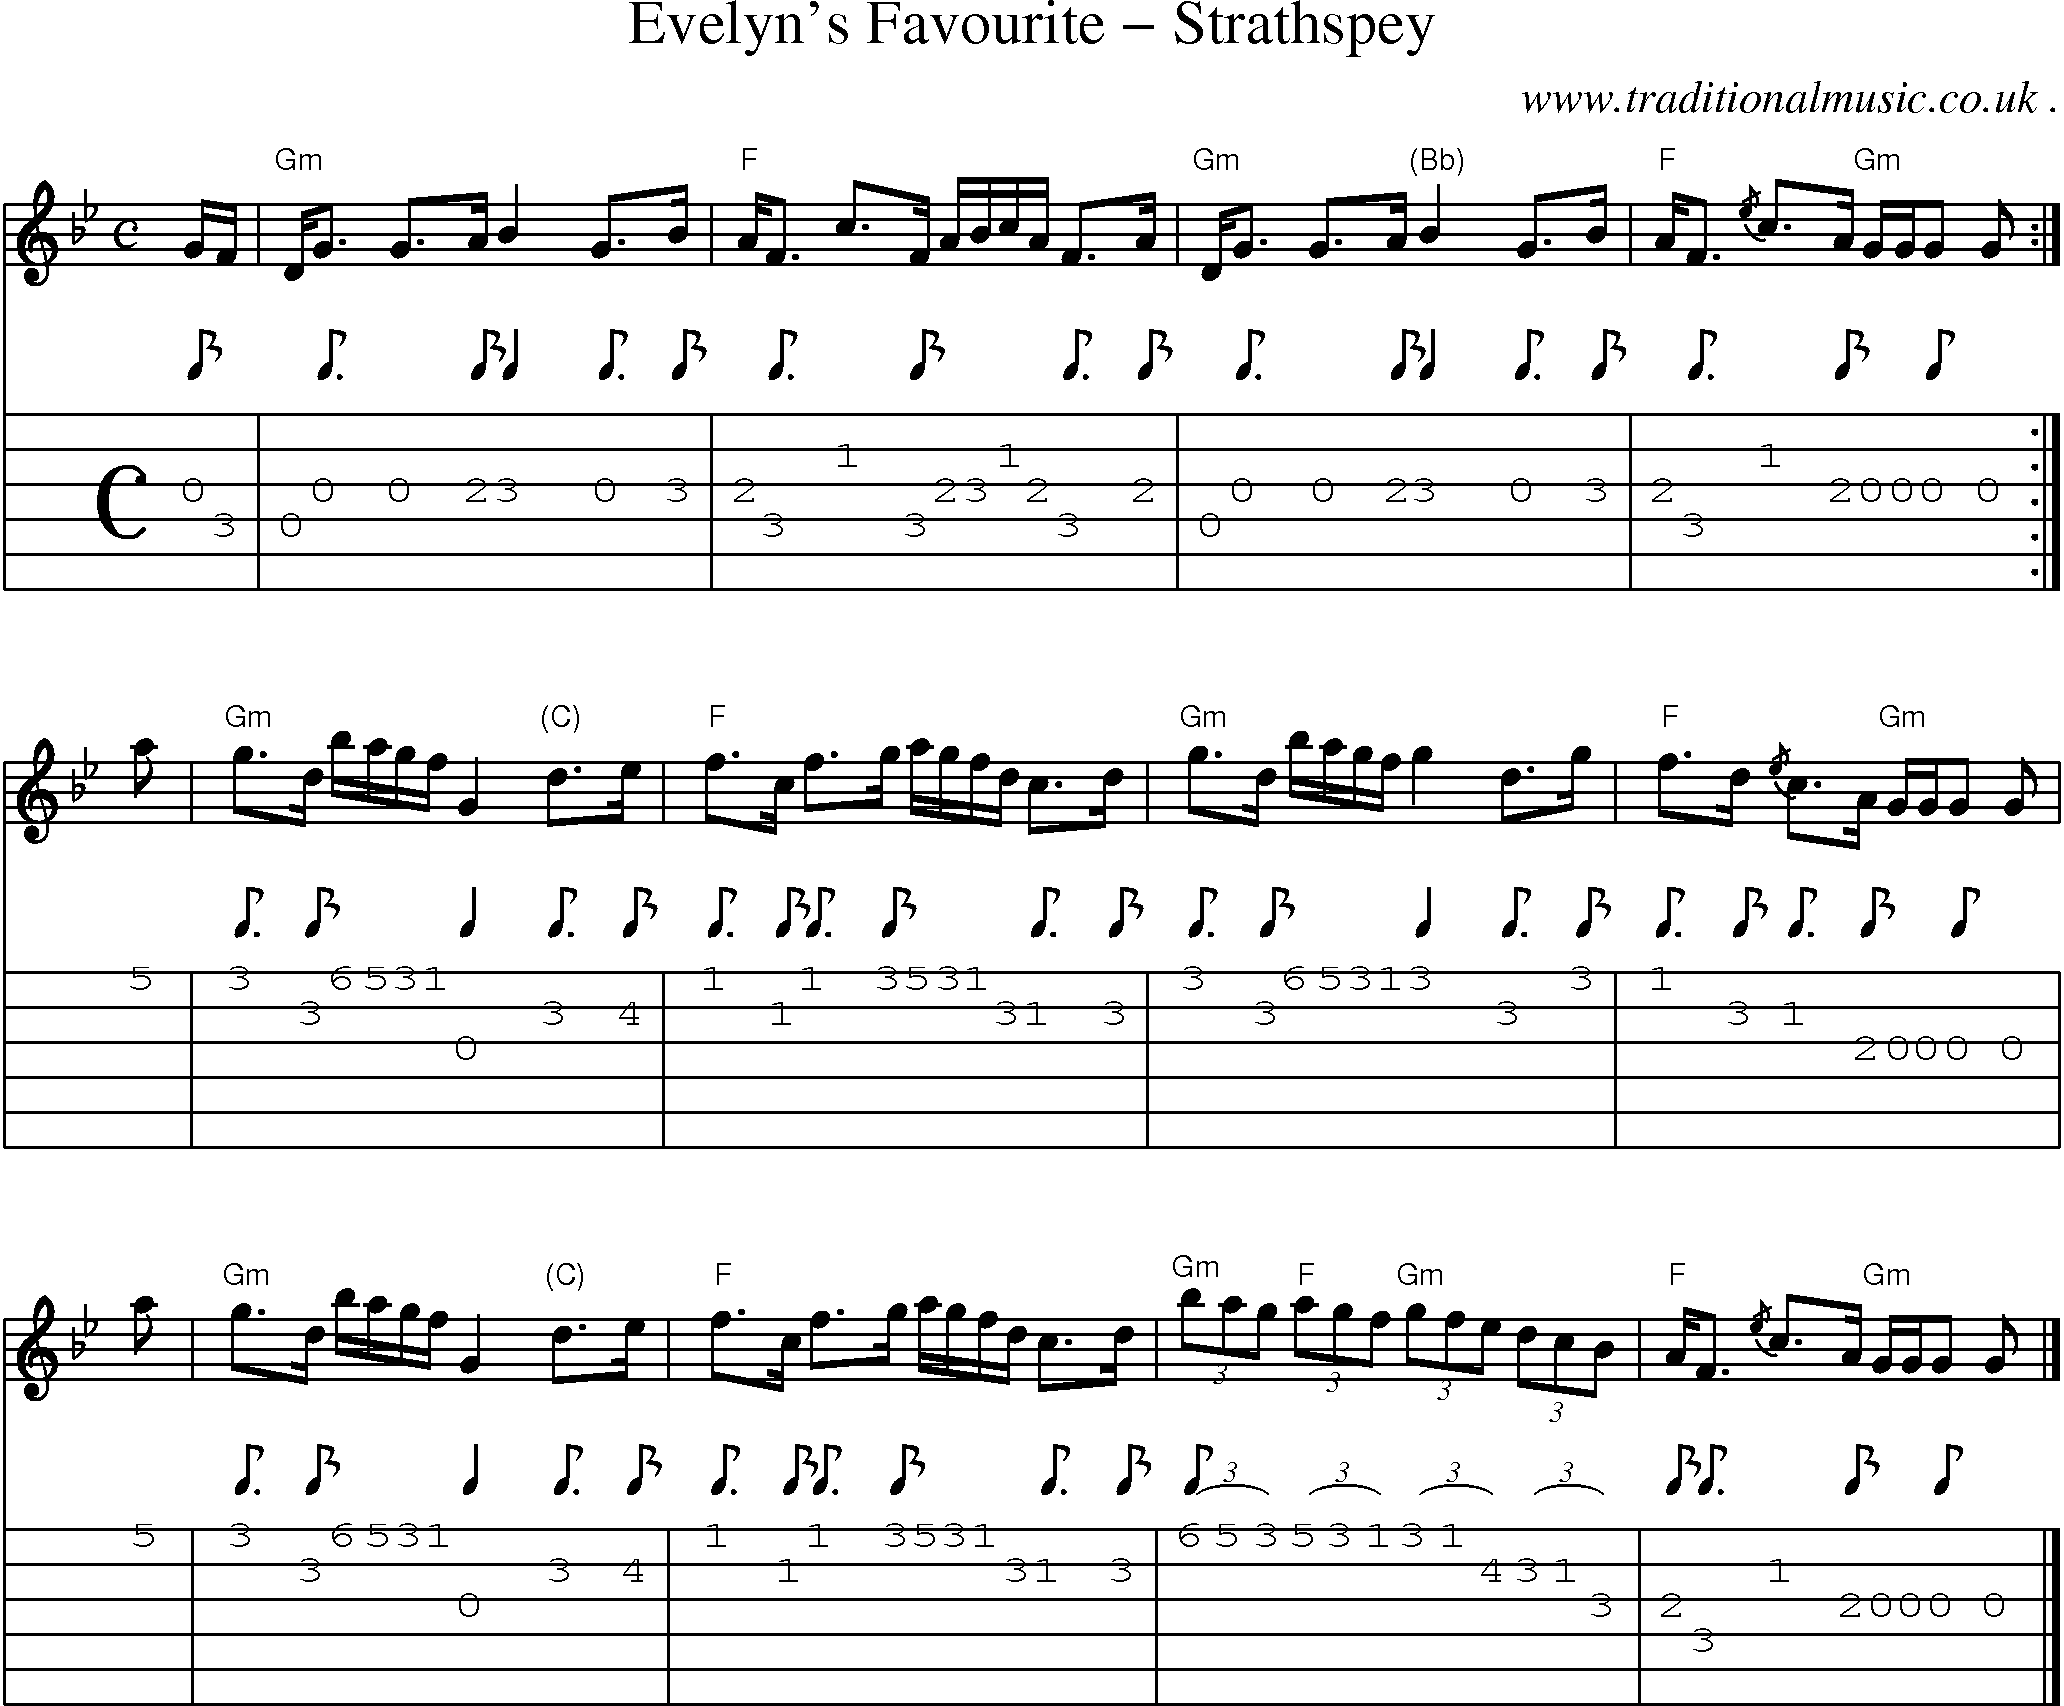 Sheet-music  score, Chords and Guitar Tabs for Evelyns Favourite Strathspey